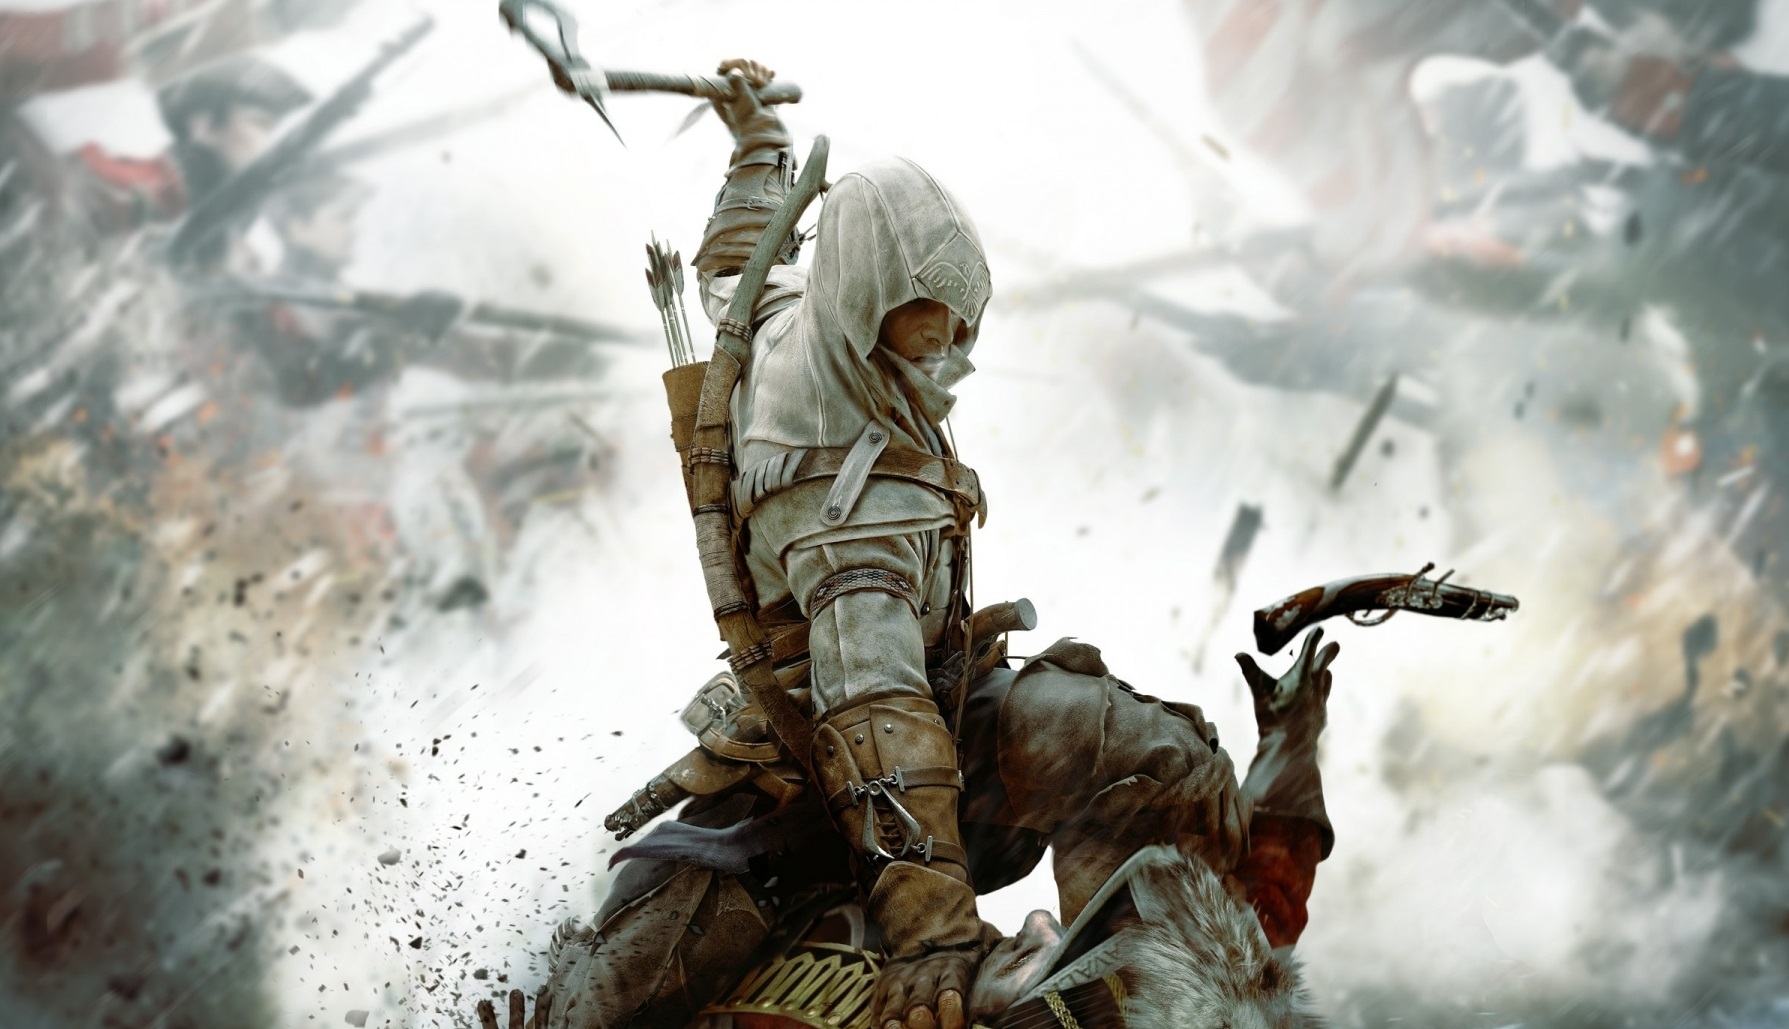 A listing for an Assassin’s Creed 3 remaster has been spotted for Nintendo Switch